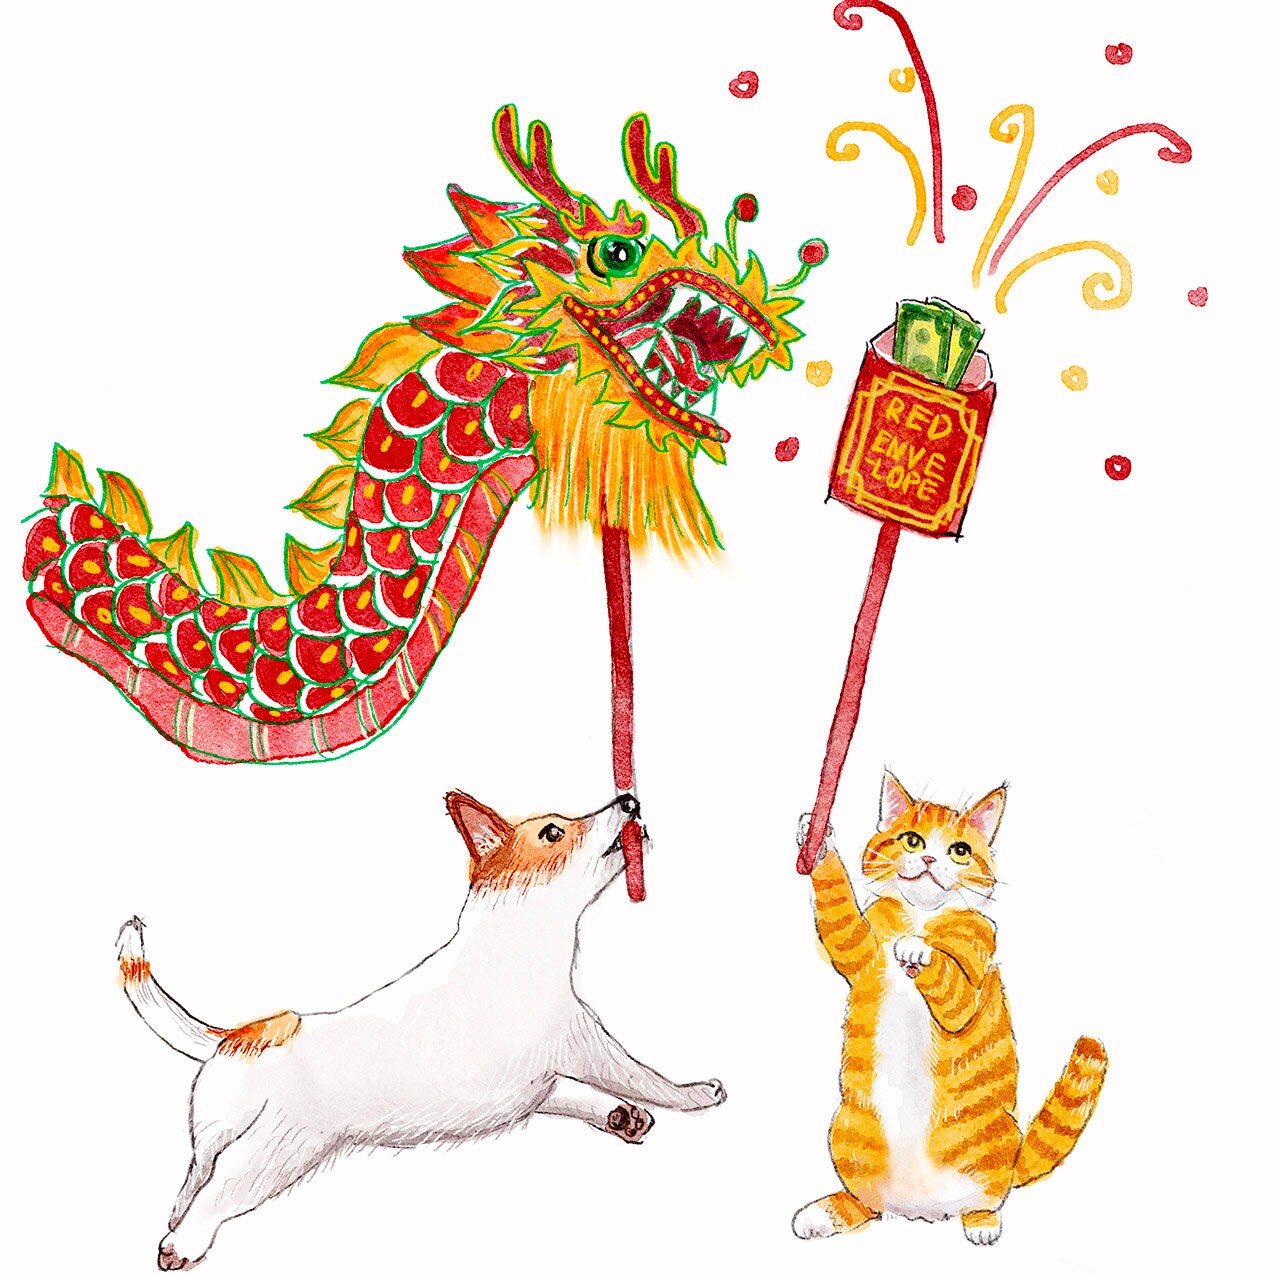 Year Of The Dragon Card - Happy Lunar New Year Cards Set - 2024 Chinese New Year Card For Kids